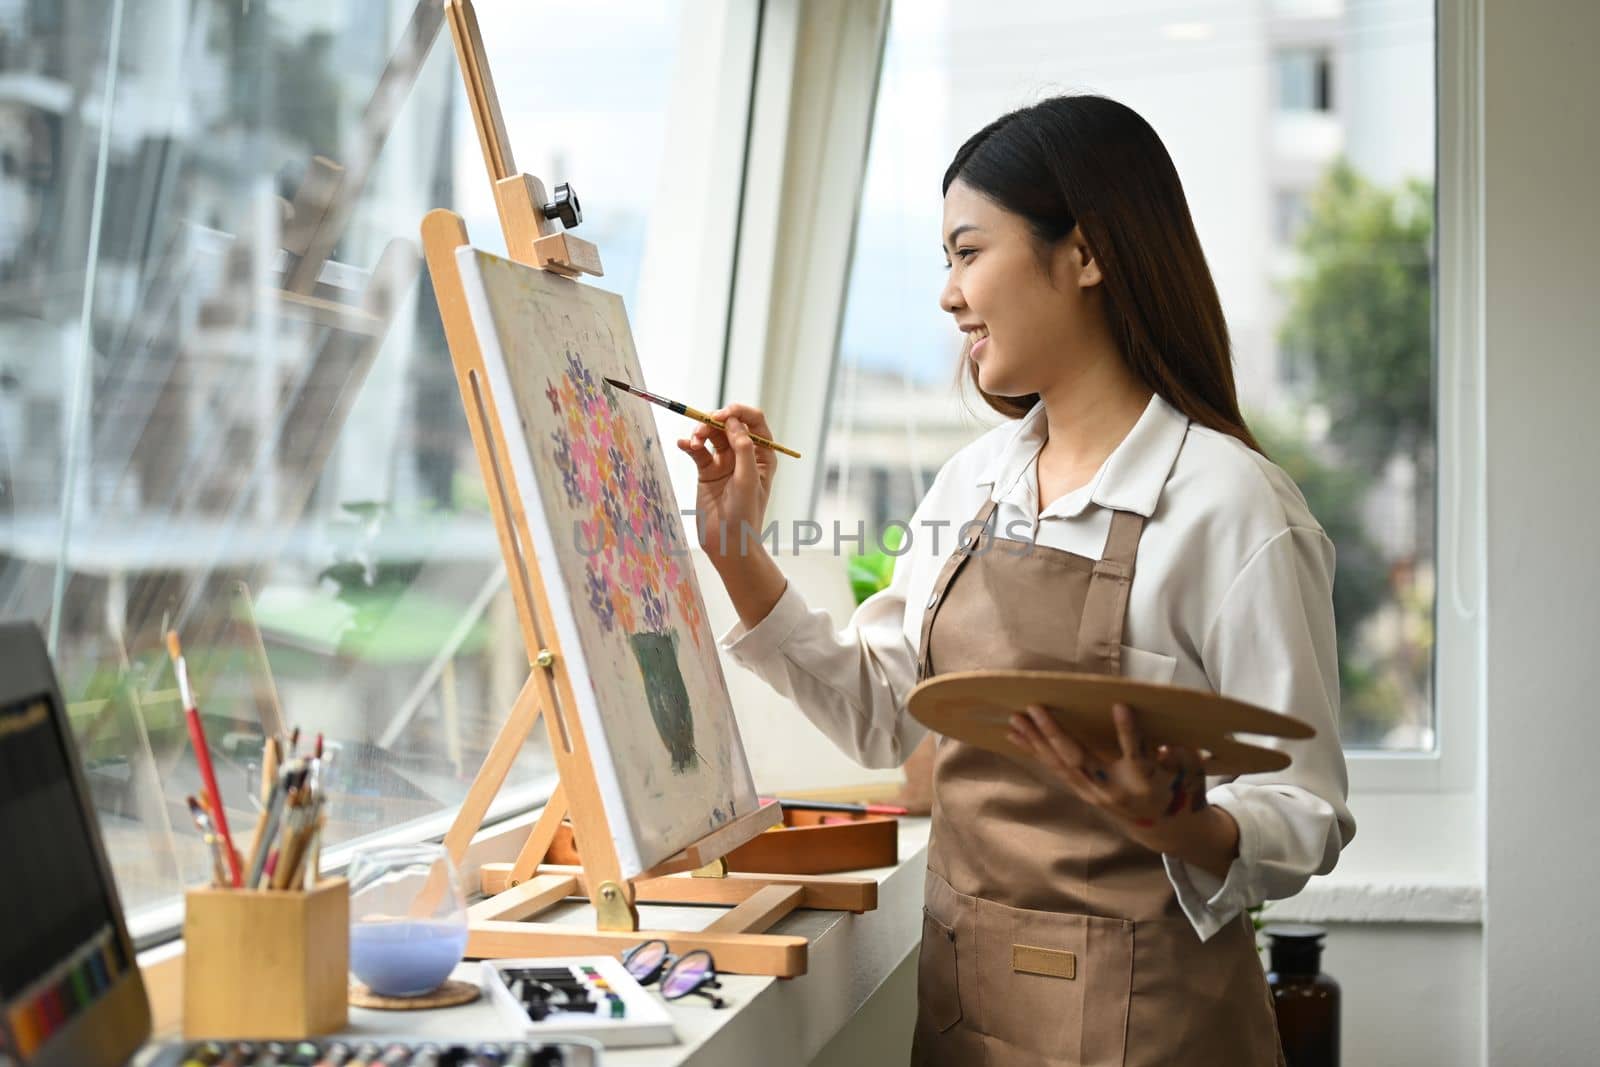 Beautiful asian woman painting picture with acrylic paints on canvas, enjoying creative leisure activities. Art and leisure activity concept by prathanchorruangsak